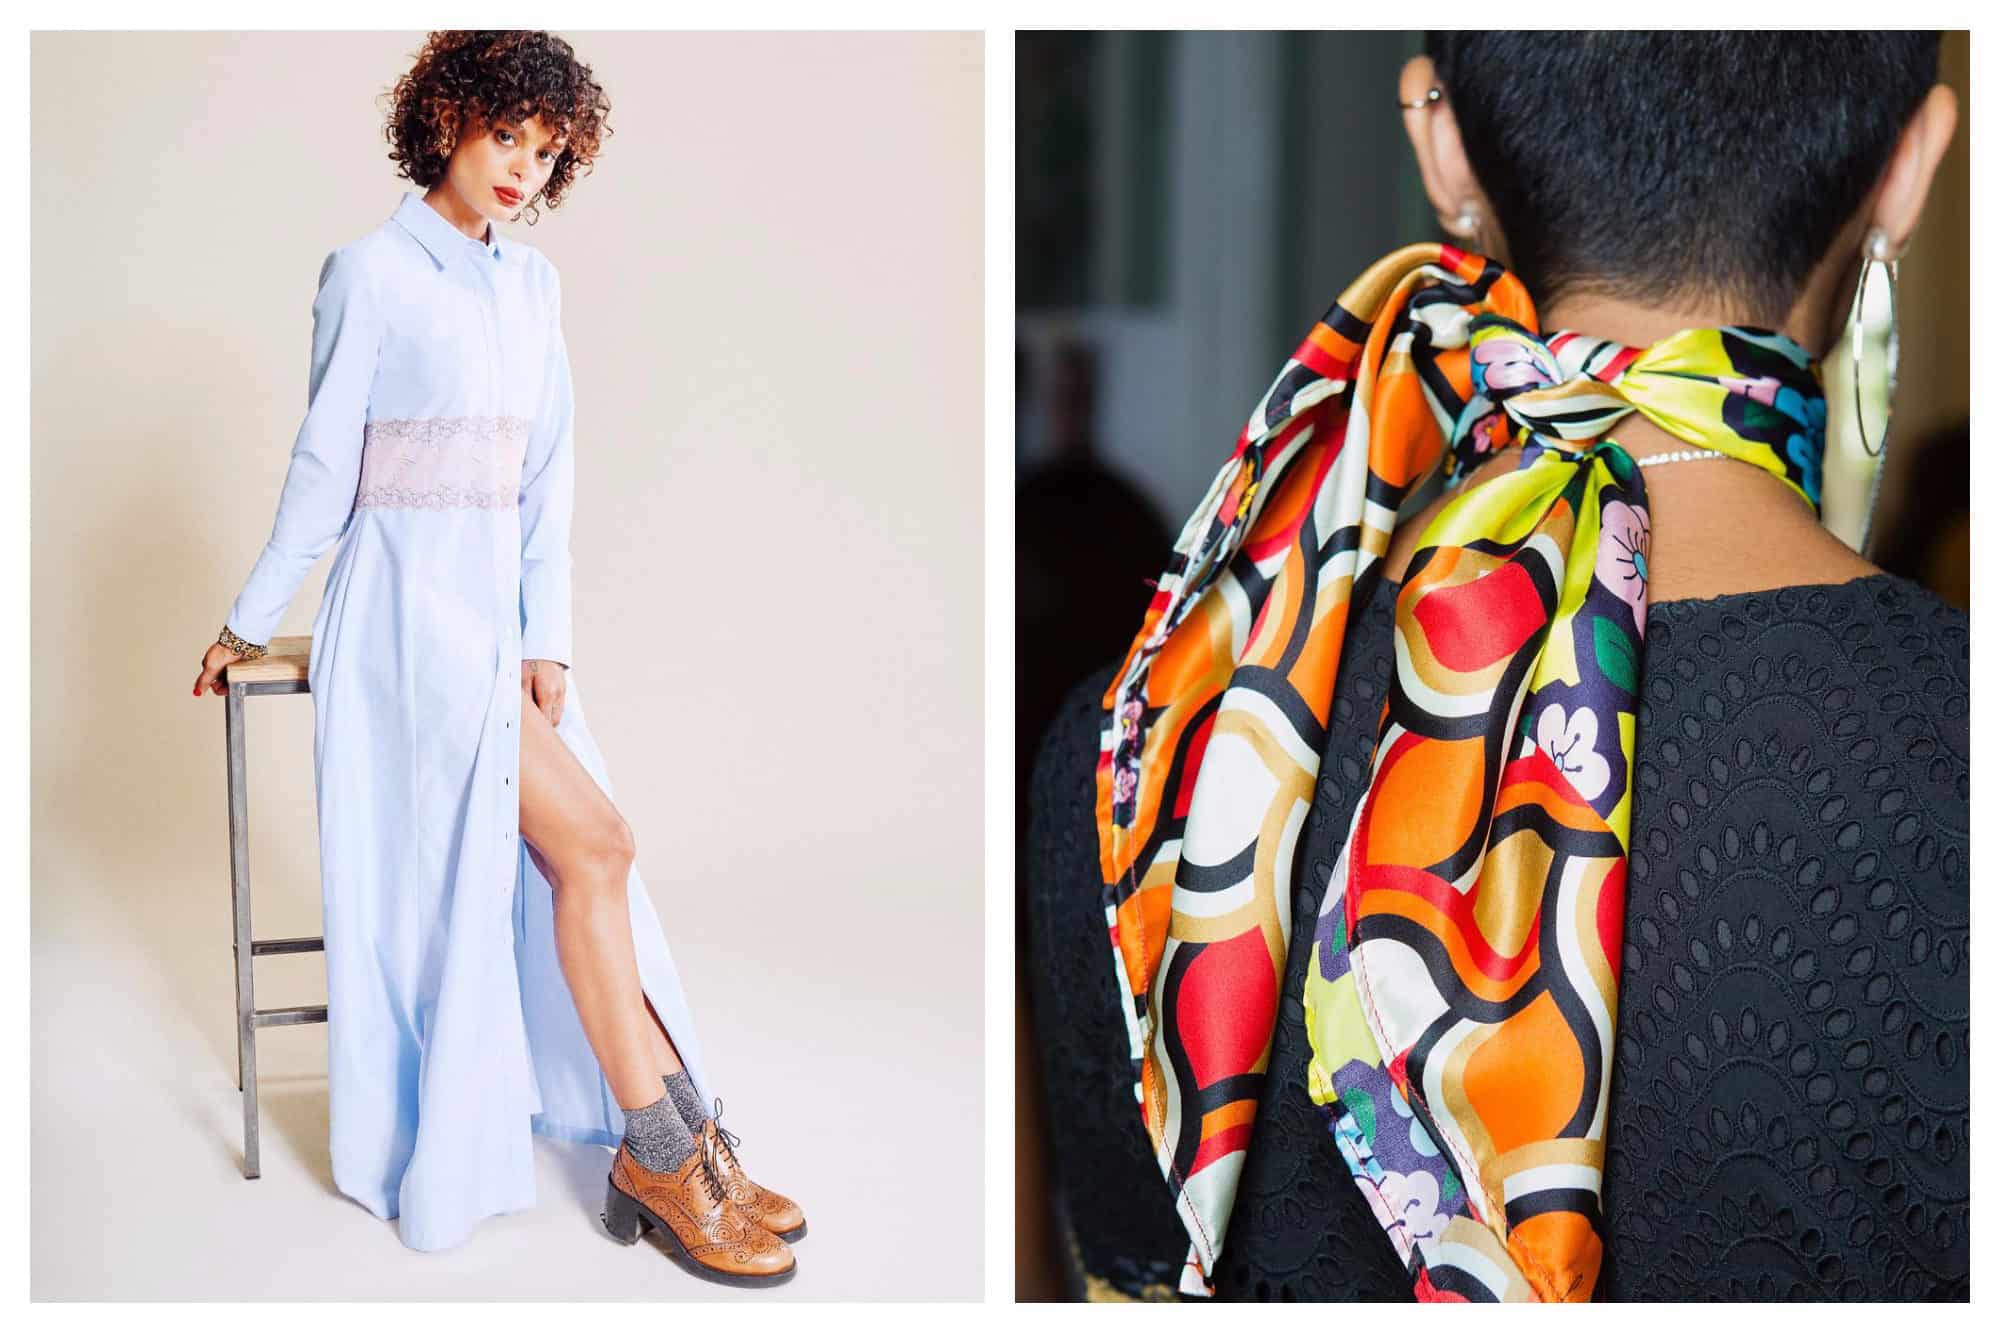 A summer shirt-dress outfit (left). A woman with short hair from the back, wearing a colorful orange-patterned silk scarf (right) by French fashion brand JOUR/NE.